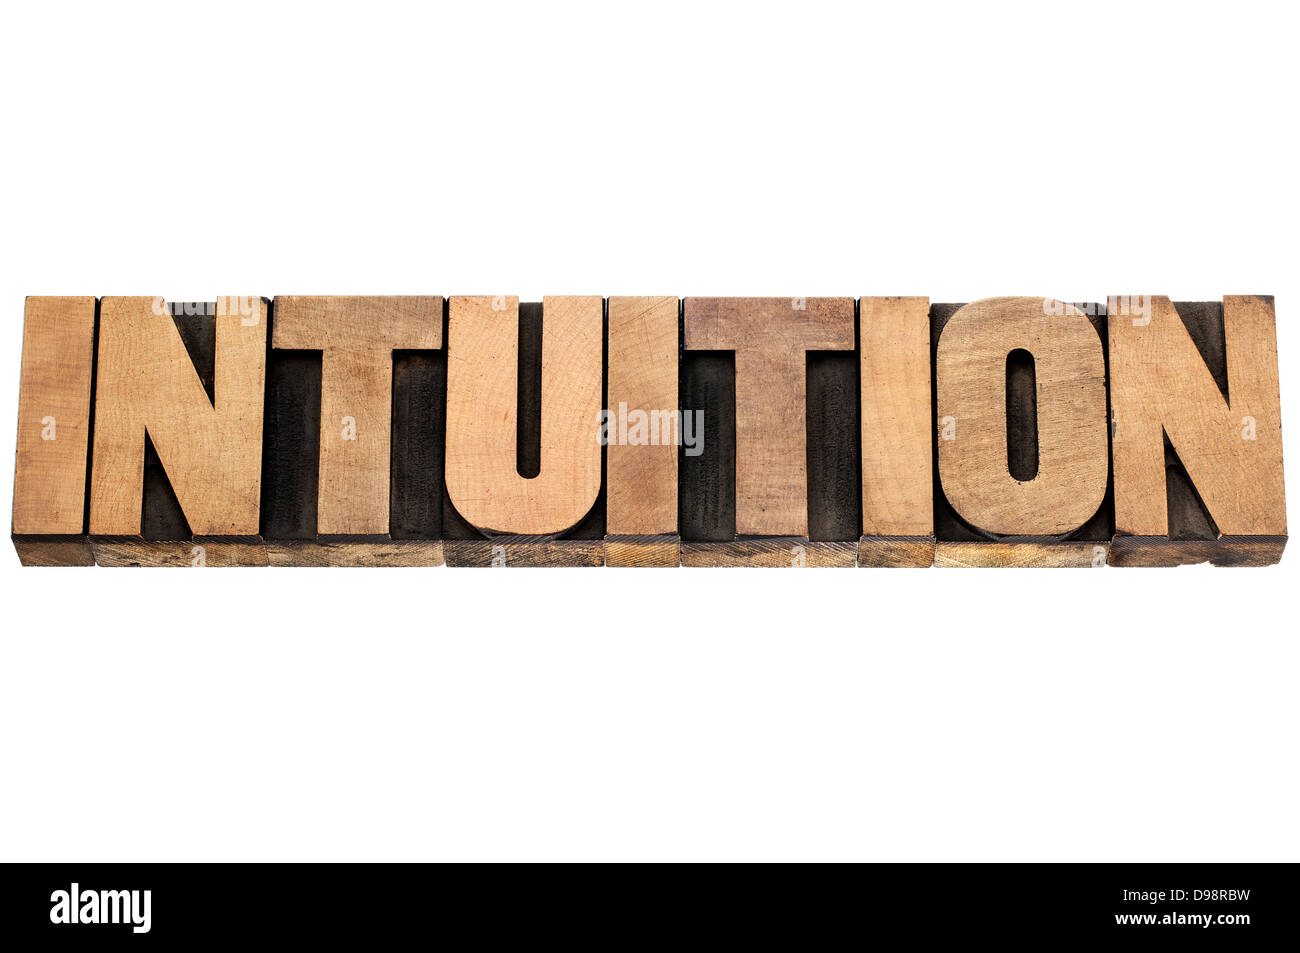 intuition word - isolated text in letterpress wood type Stock Photo